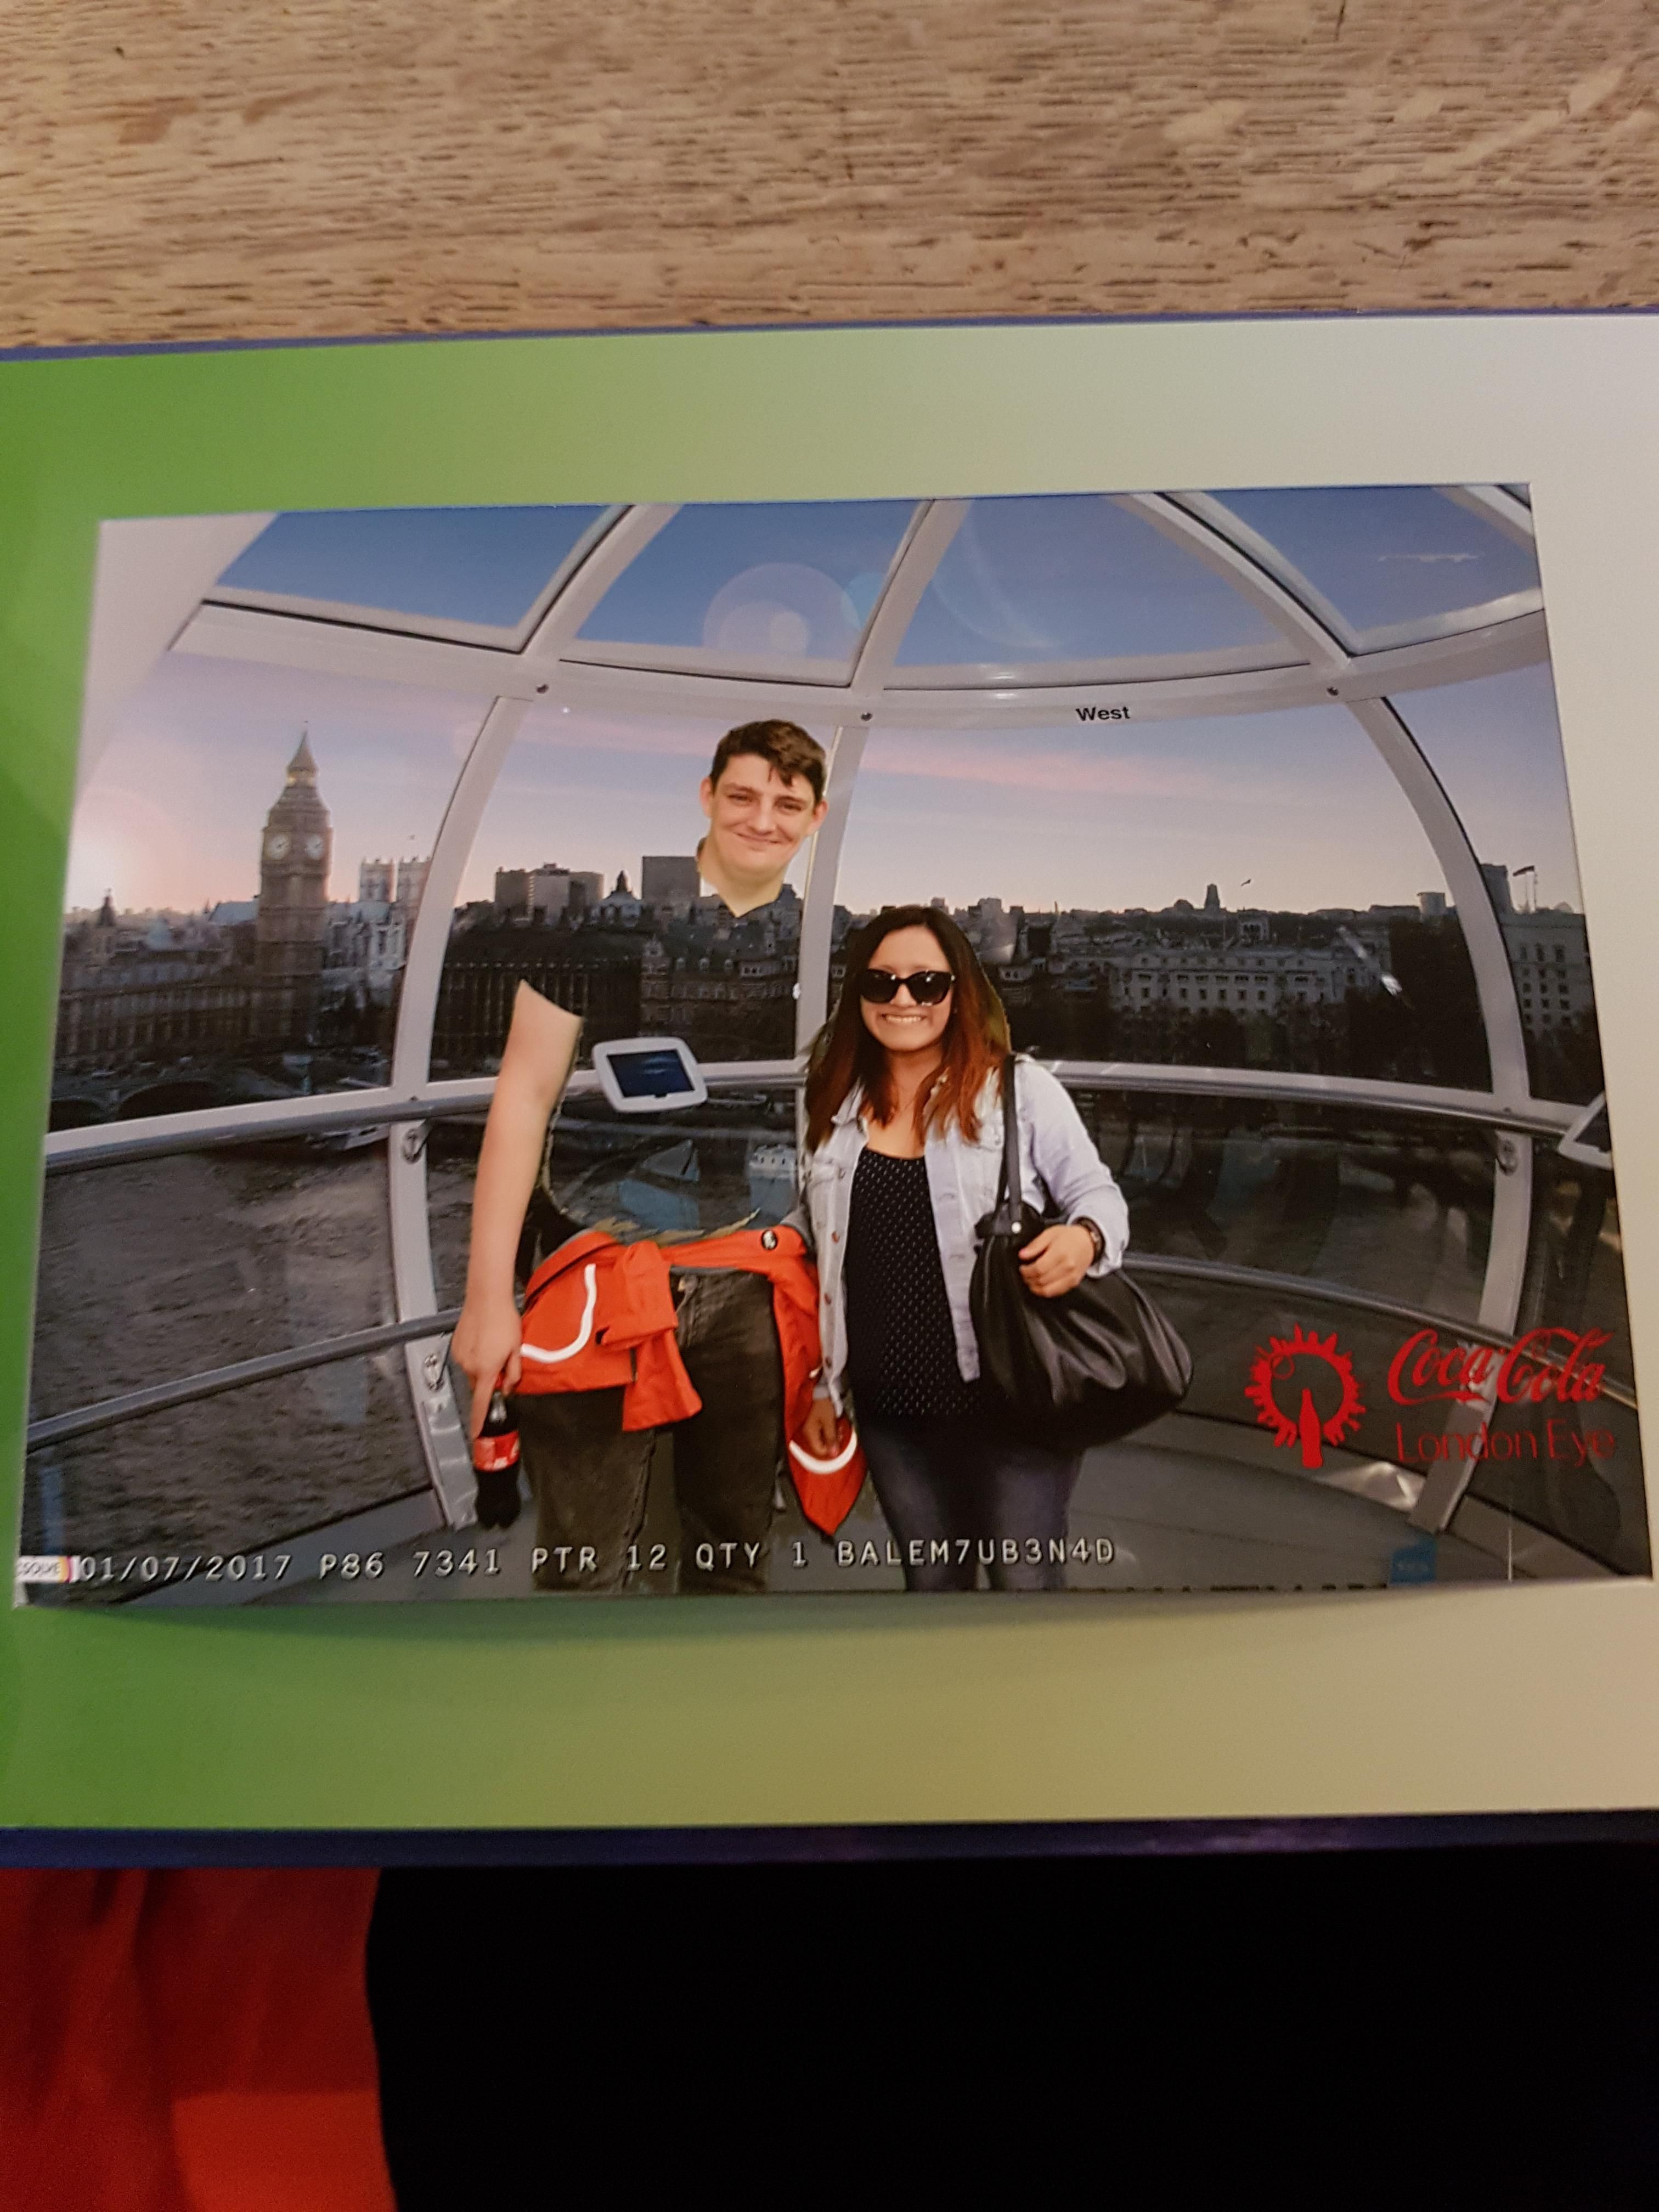 My friend wore a green t-shirt for his tourist green screen photo at the London eye